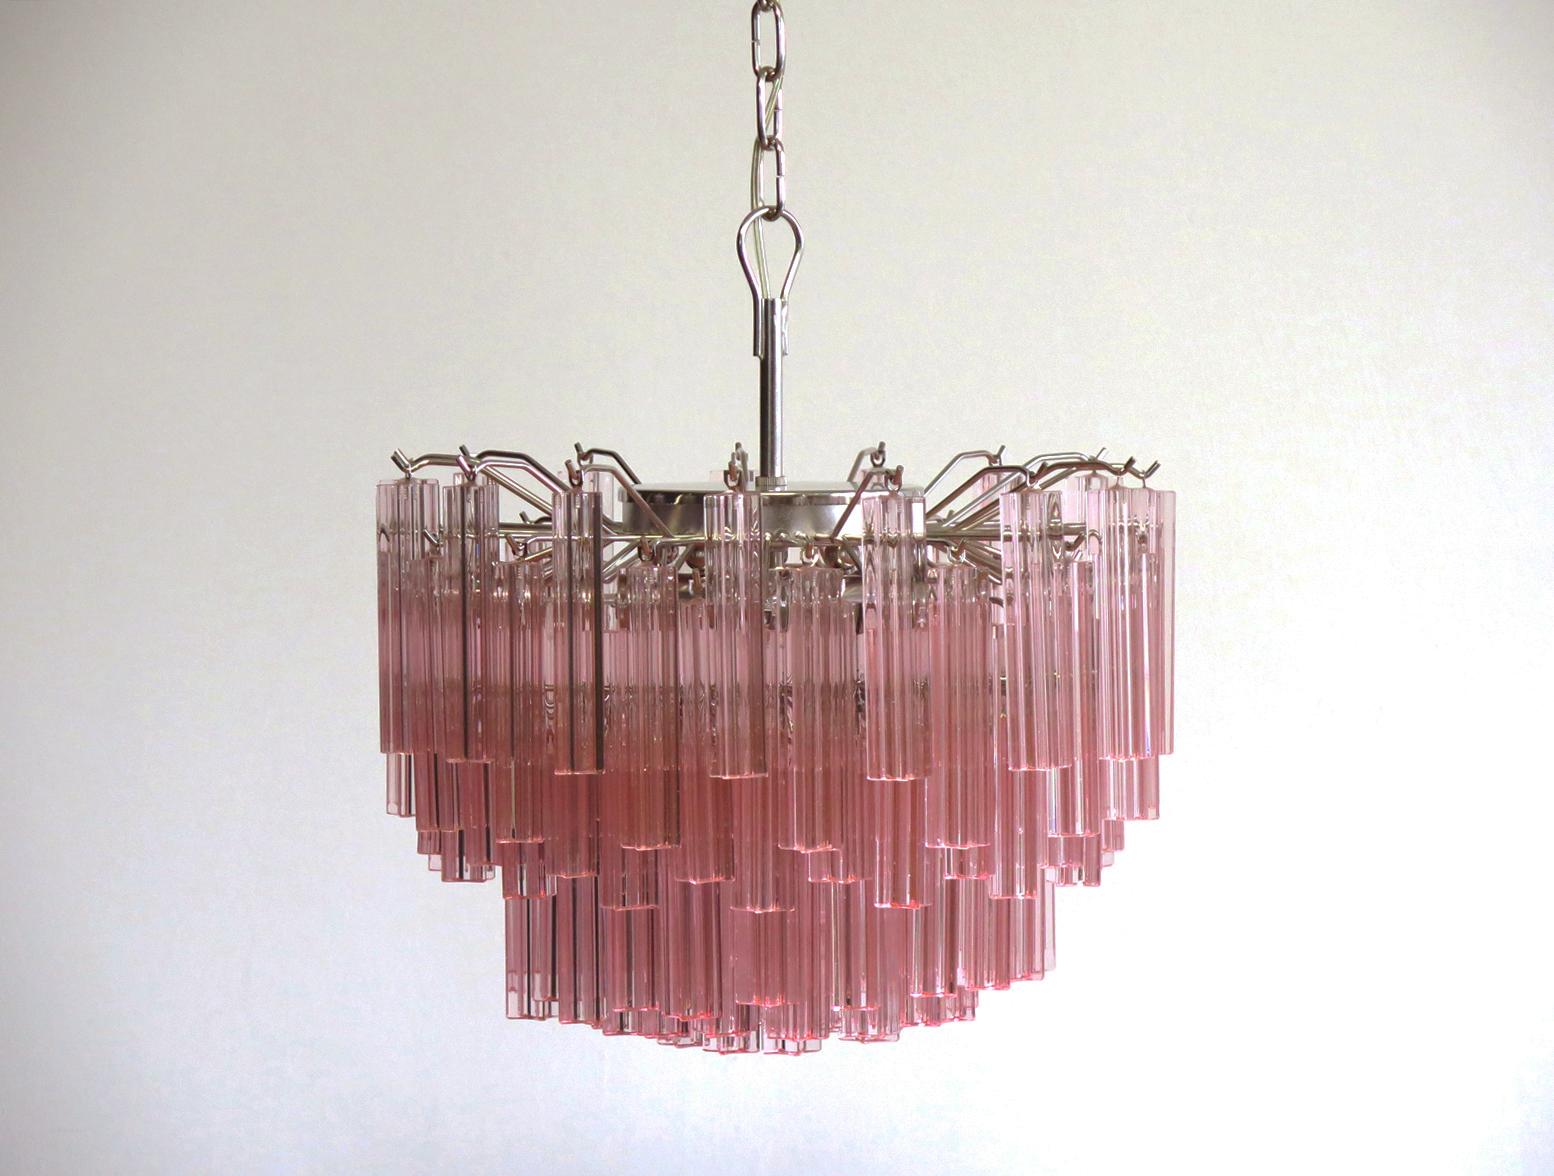 Fantastic vintage Murano chandelier made by 107 Murano crystal prism quadriedri in a nickel metal frame. The glass has a slightly pink color.
Period: 1980s
Dimensions: 45.25 inches height (115 cm) with chain; 15.75 inches height (40 cm) without